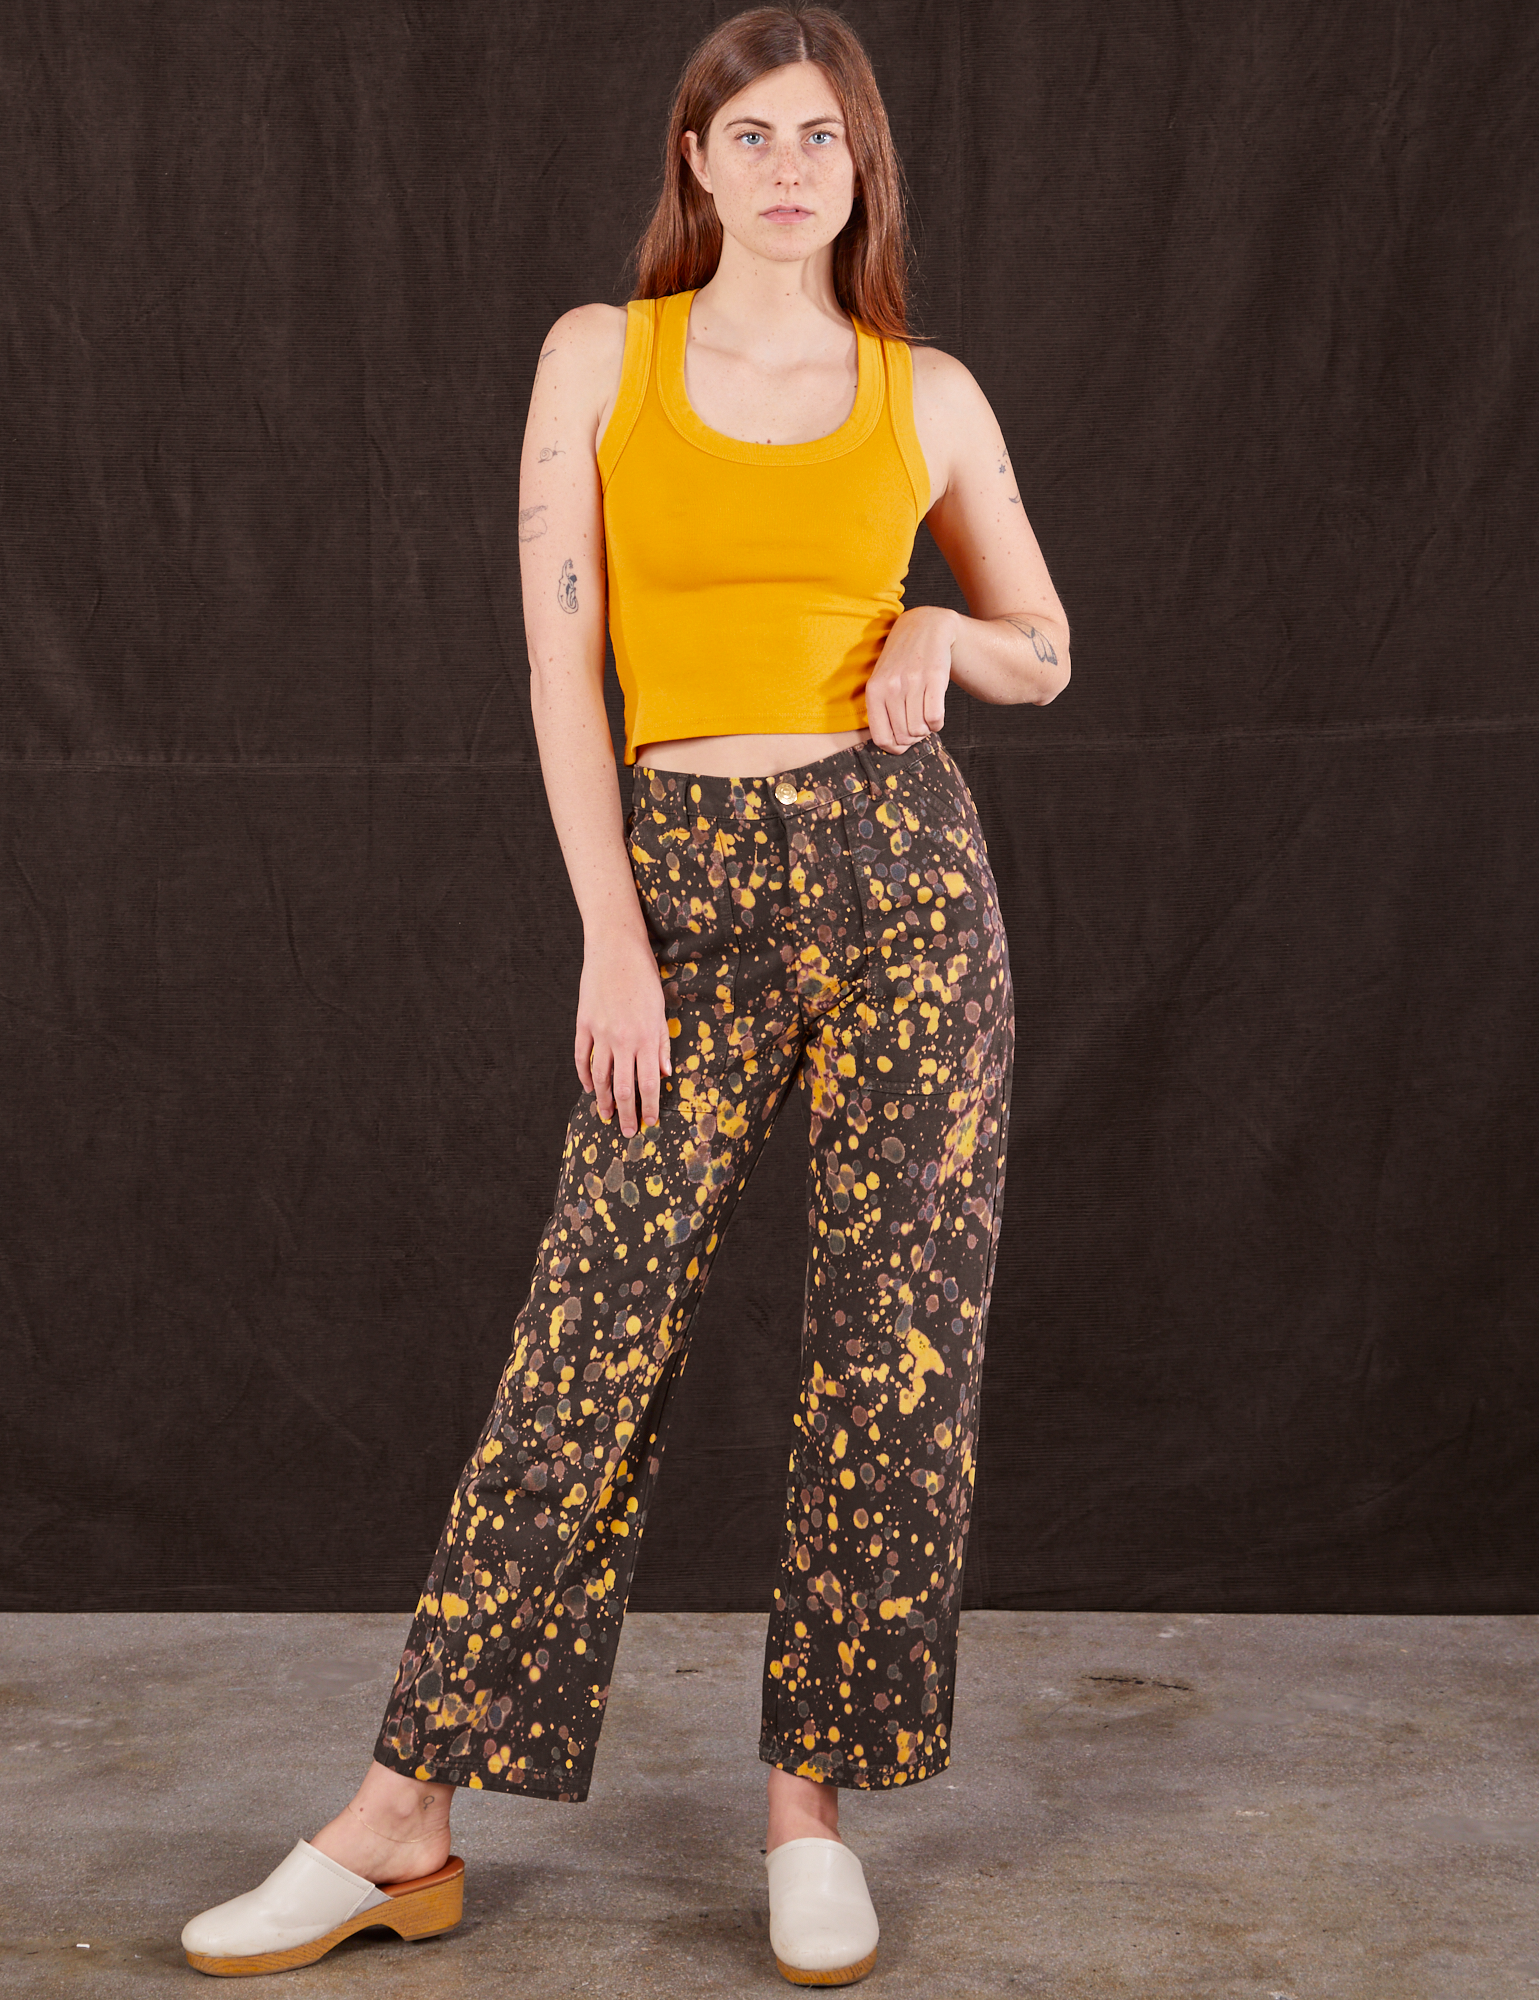 Scarlett is 5&#39;9&quot; and wearing XS Marble Splatter Work Pants in Espresso Brown paired with mustard yellow Tank Top